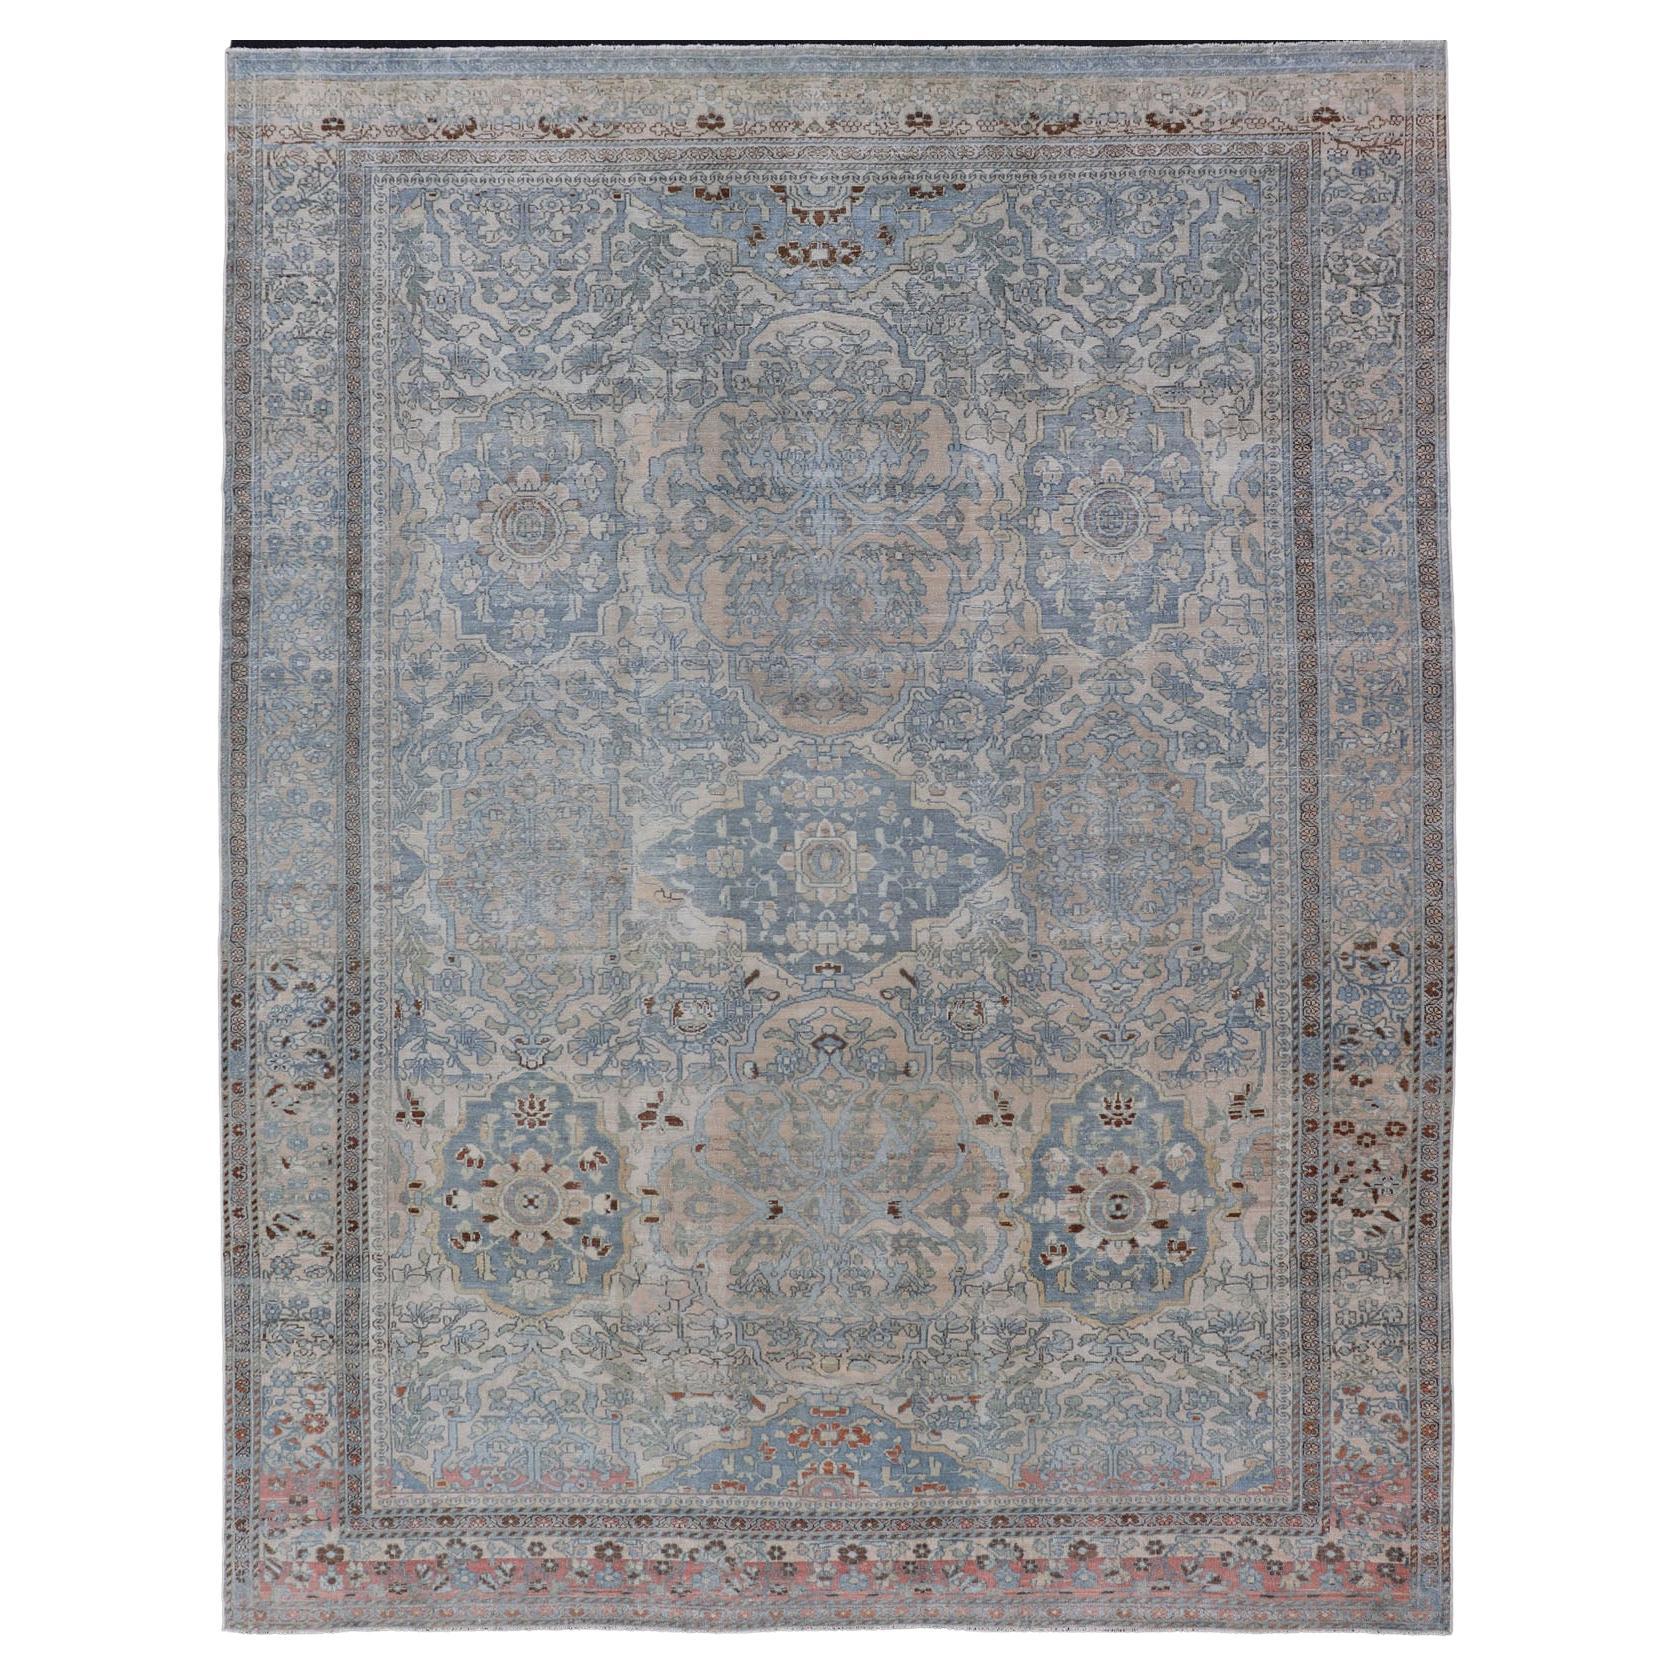 Antique Persian Bakhtiari Rug with All-Over Sub Floral Medallions & Geometrics 